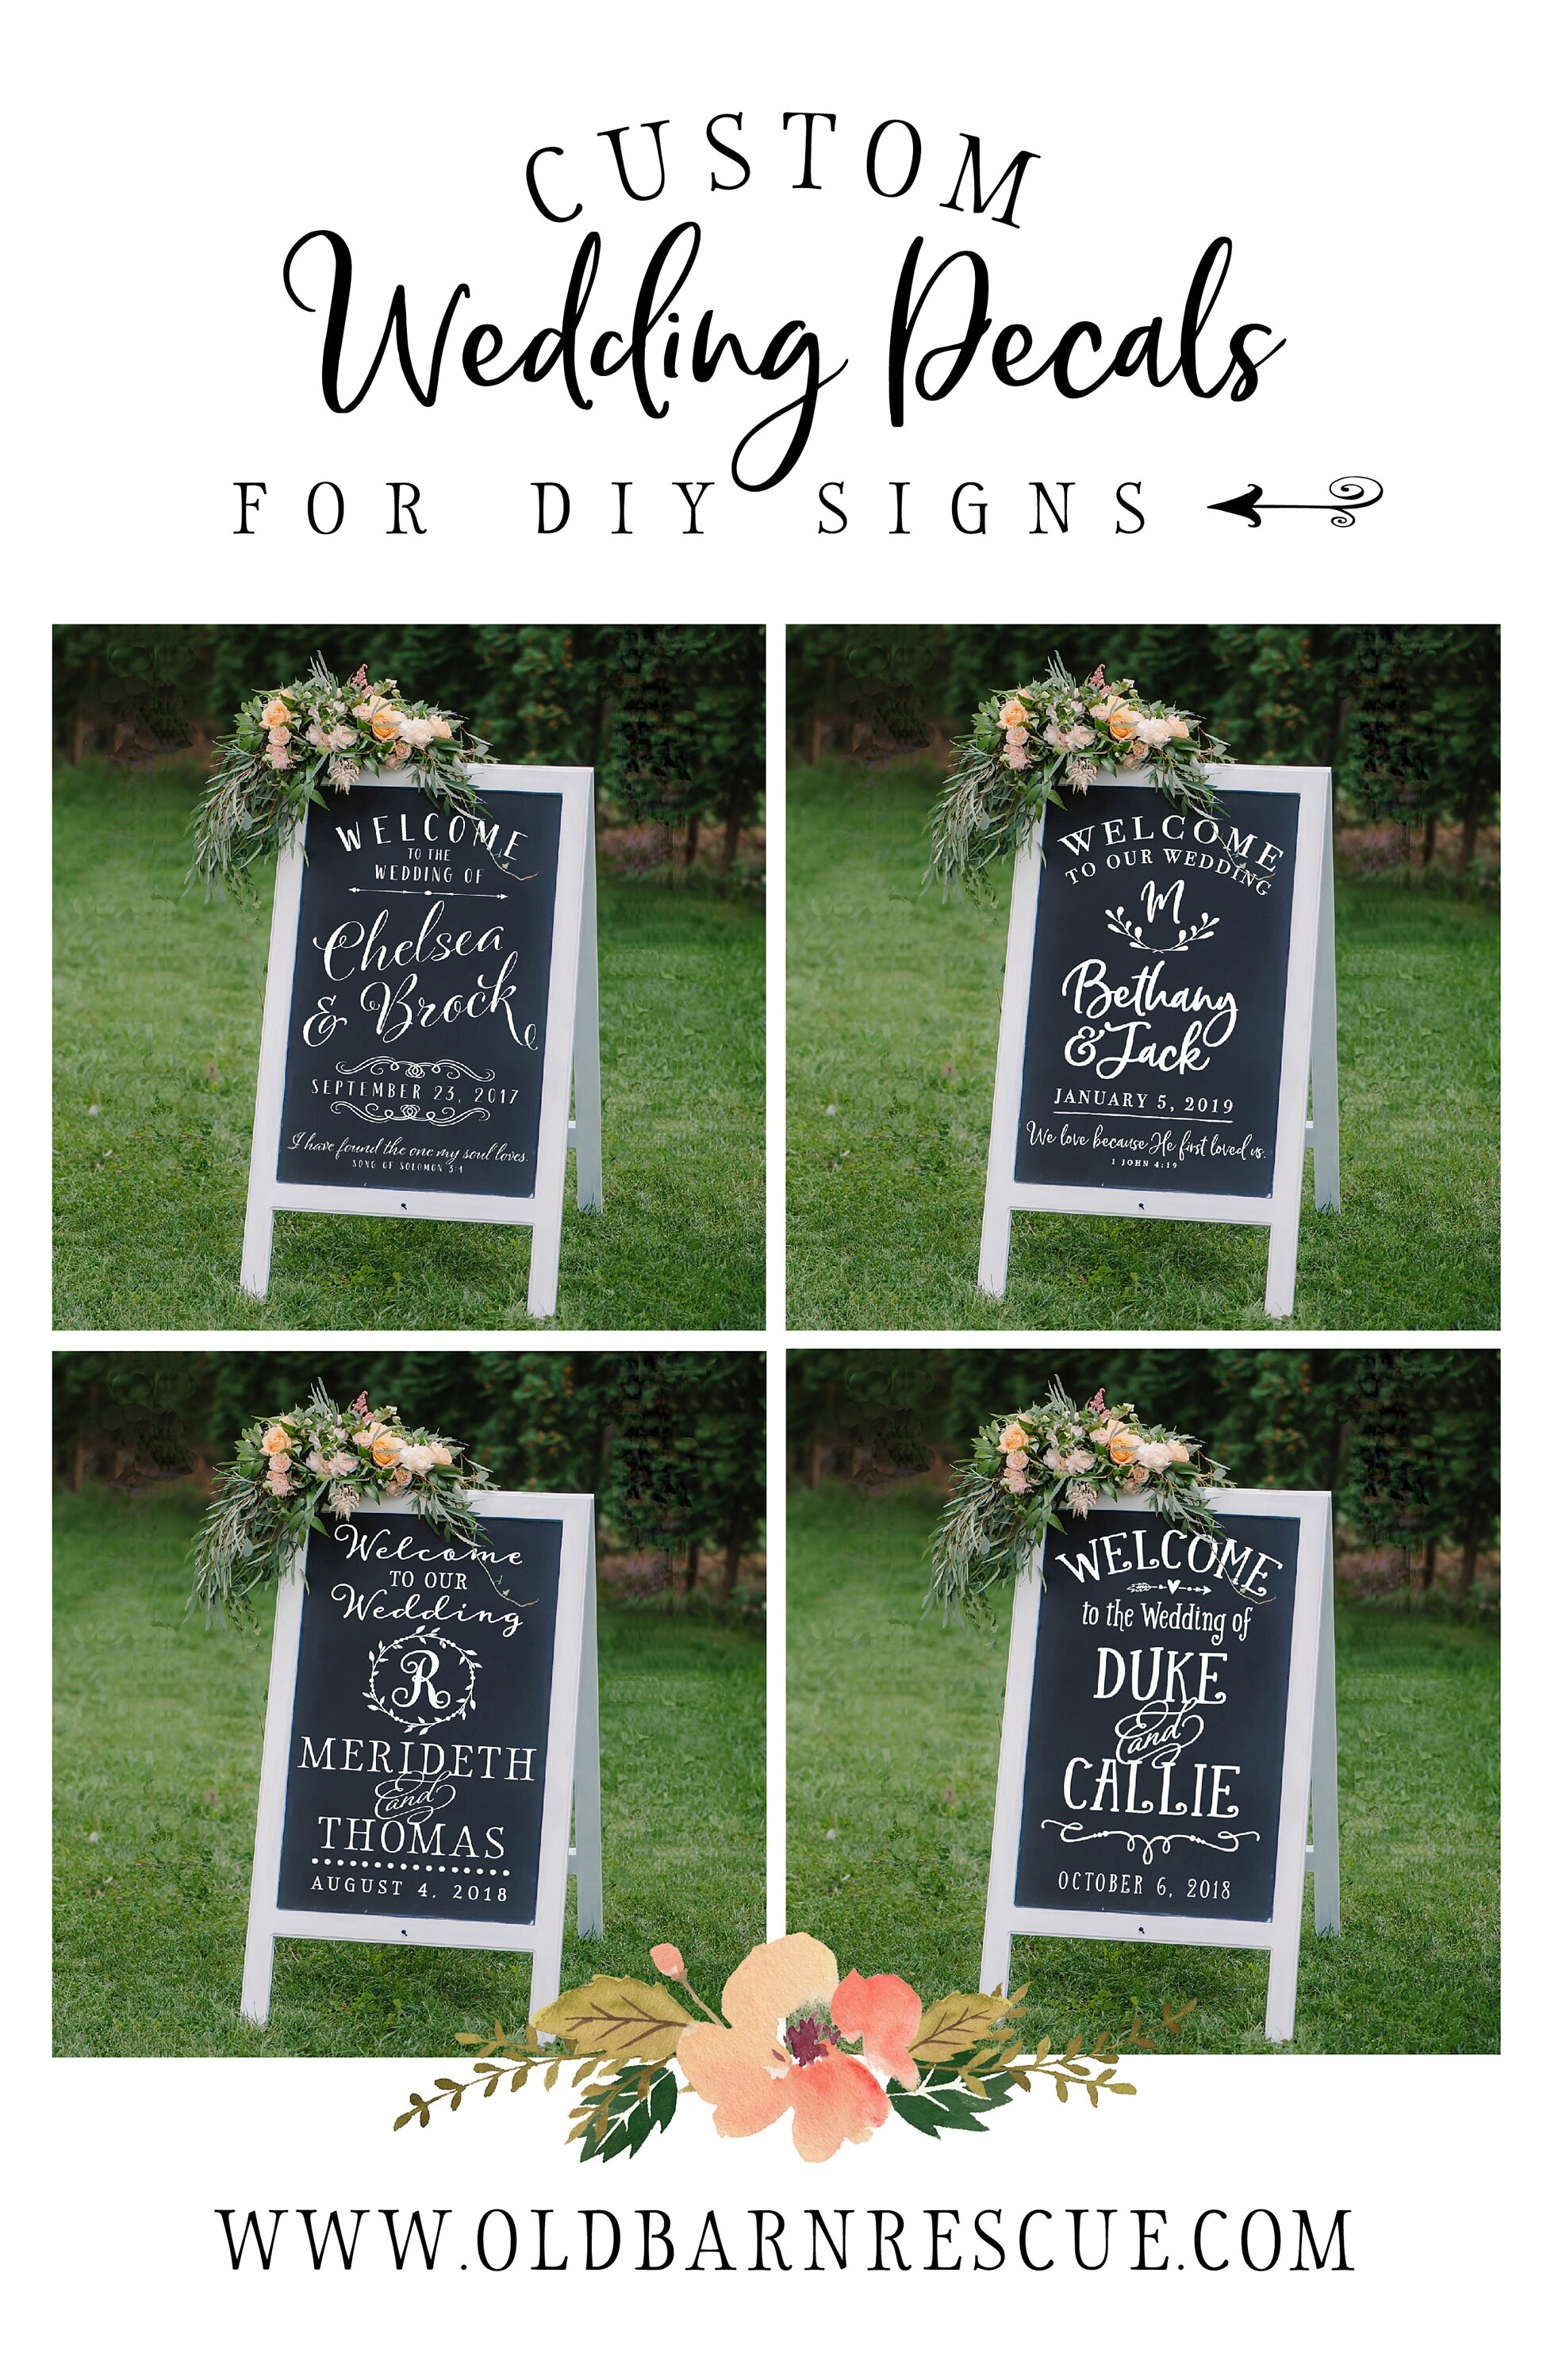 Please Choose a Seat and Not a Side Wedding Sign Decal – Vinyl Written